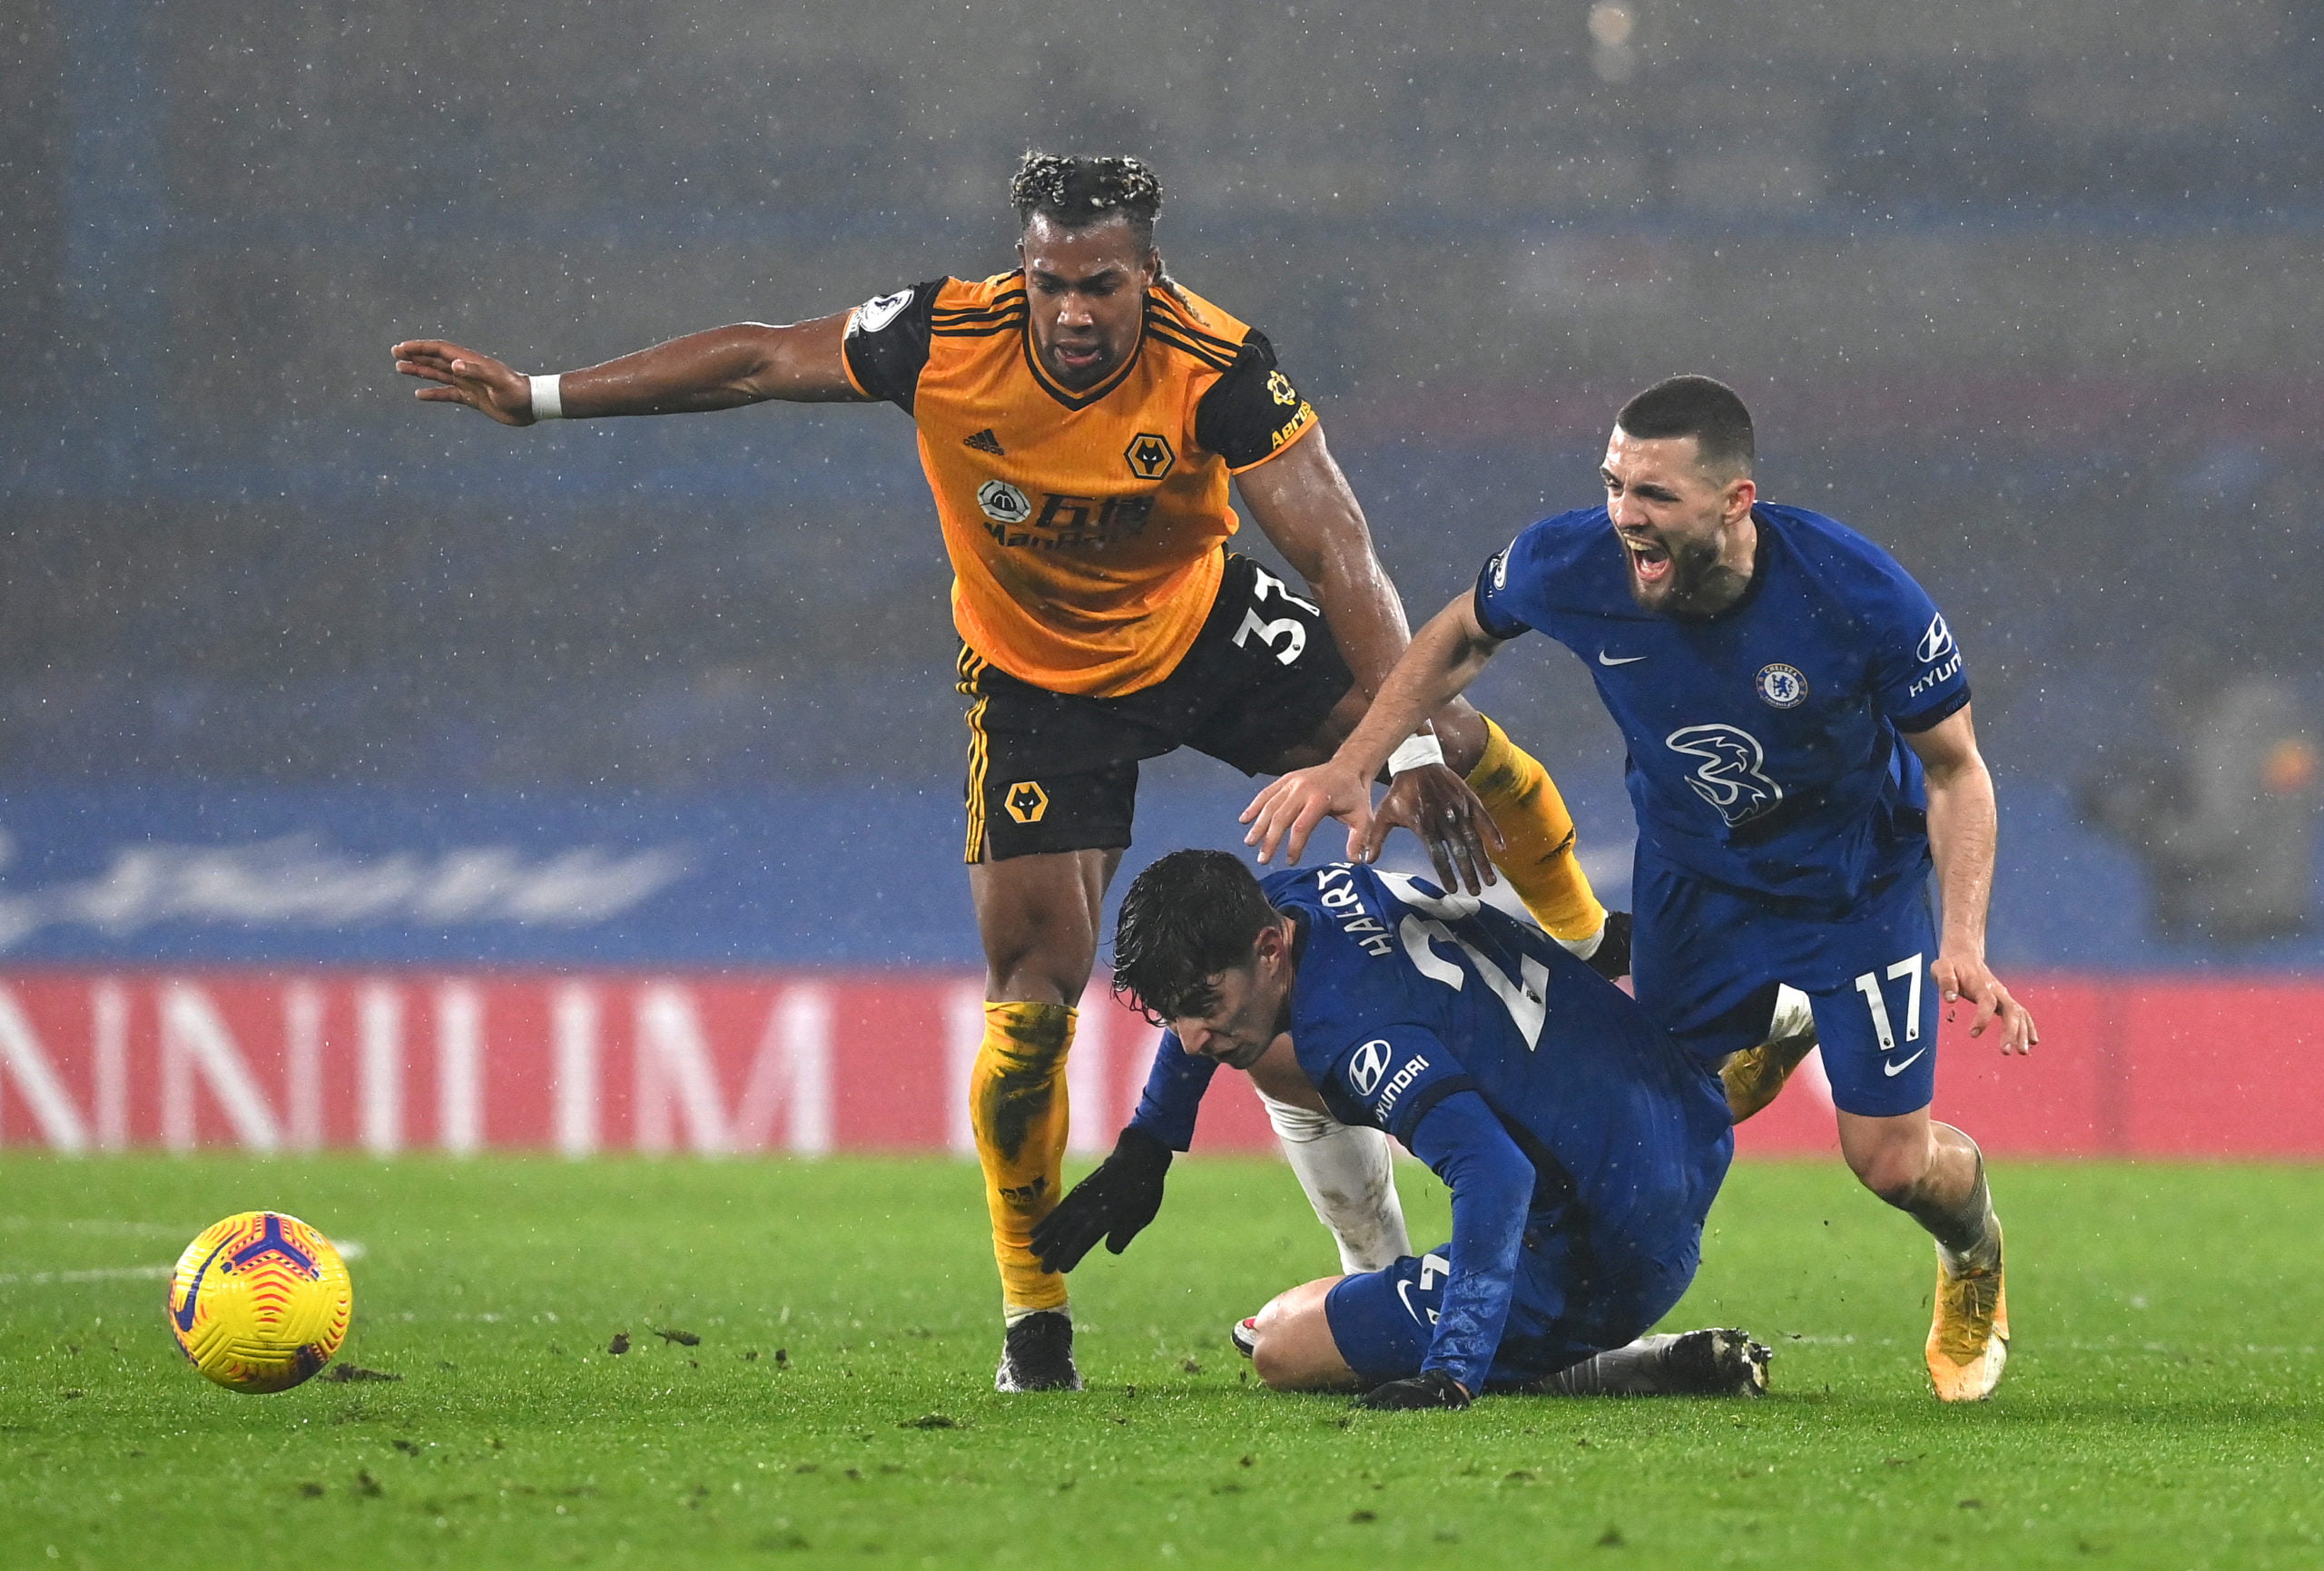 Chelsea players rated in lacklustre draw vs Wolves (Chelsea players are in action in the photo)